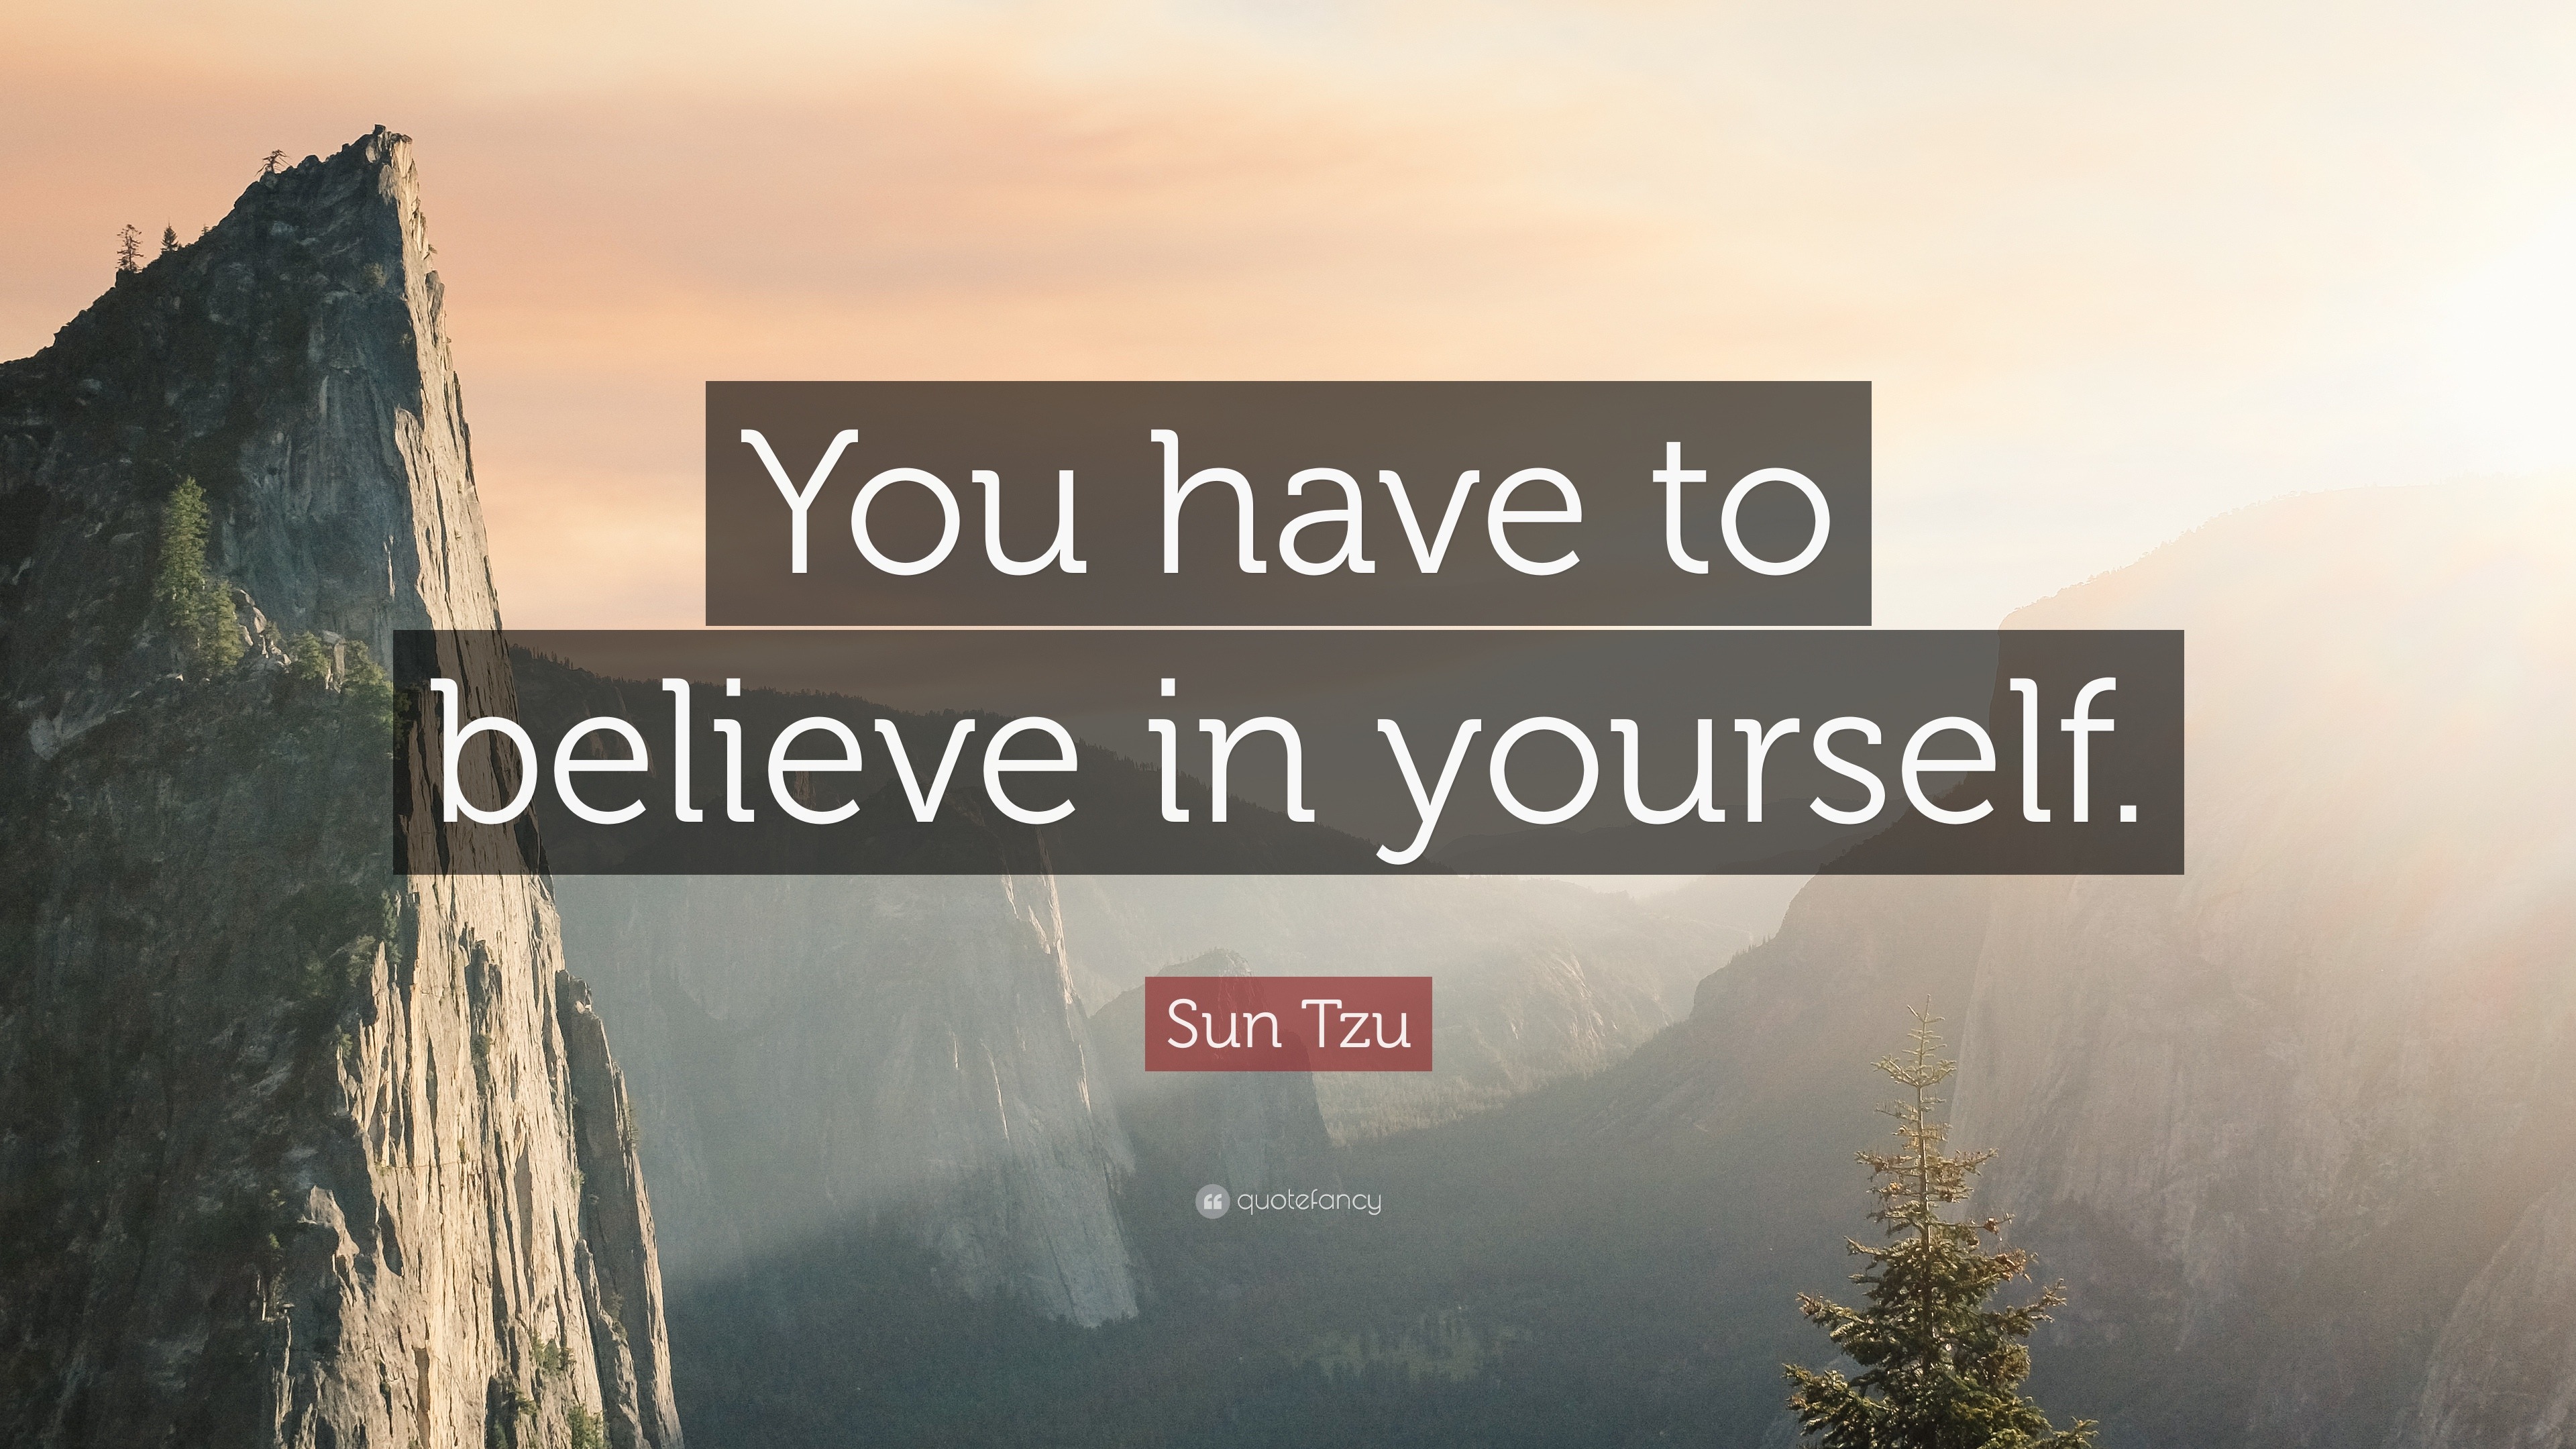 Sun Tzu Quote: “You have to believe in yourself. ” (23 wallpapers